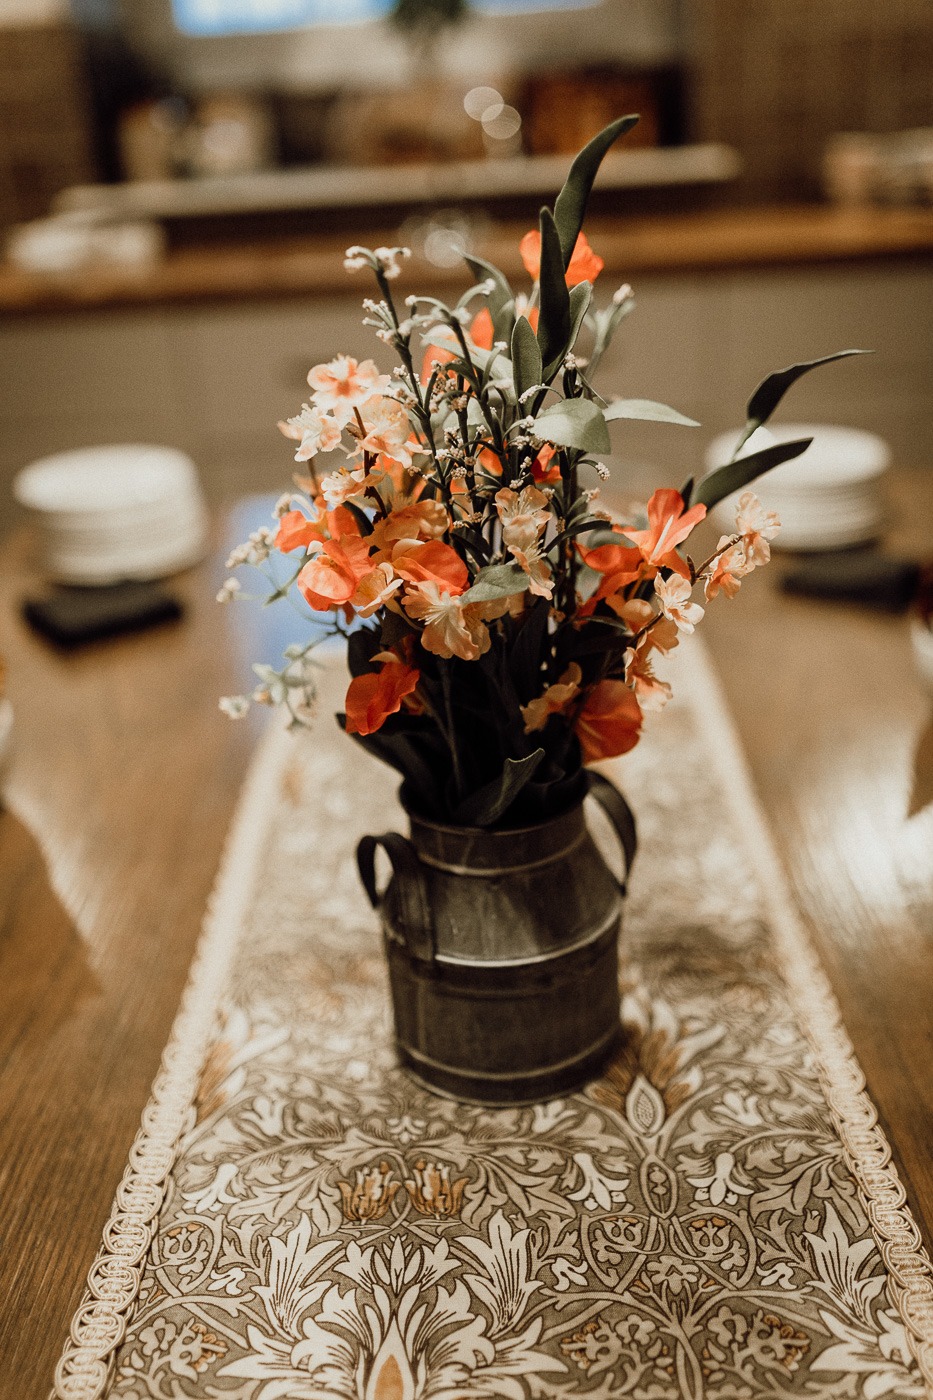 A vase filled with flowers sitting on top of a wooden table